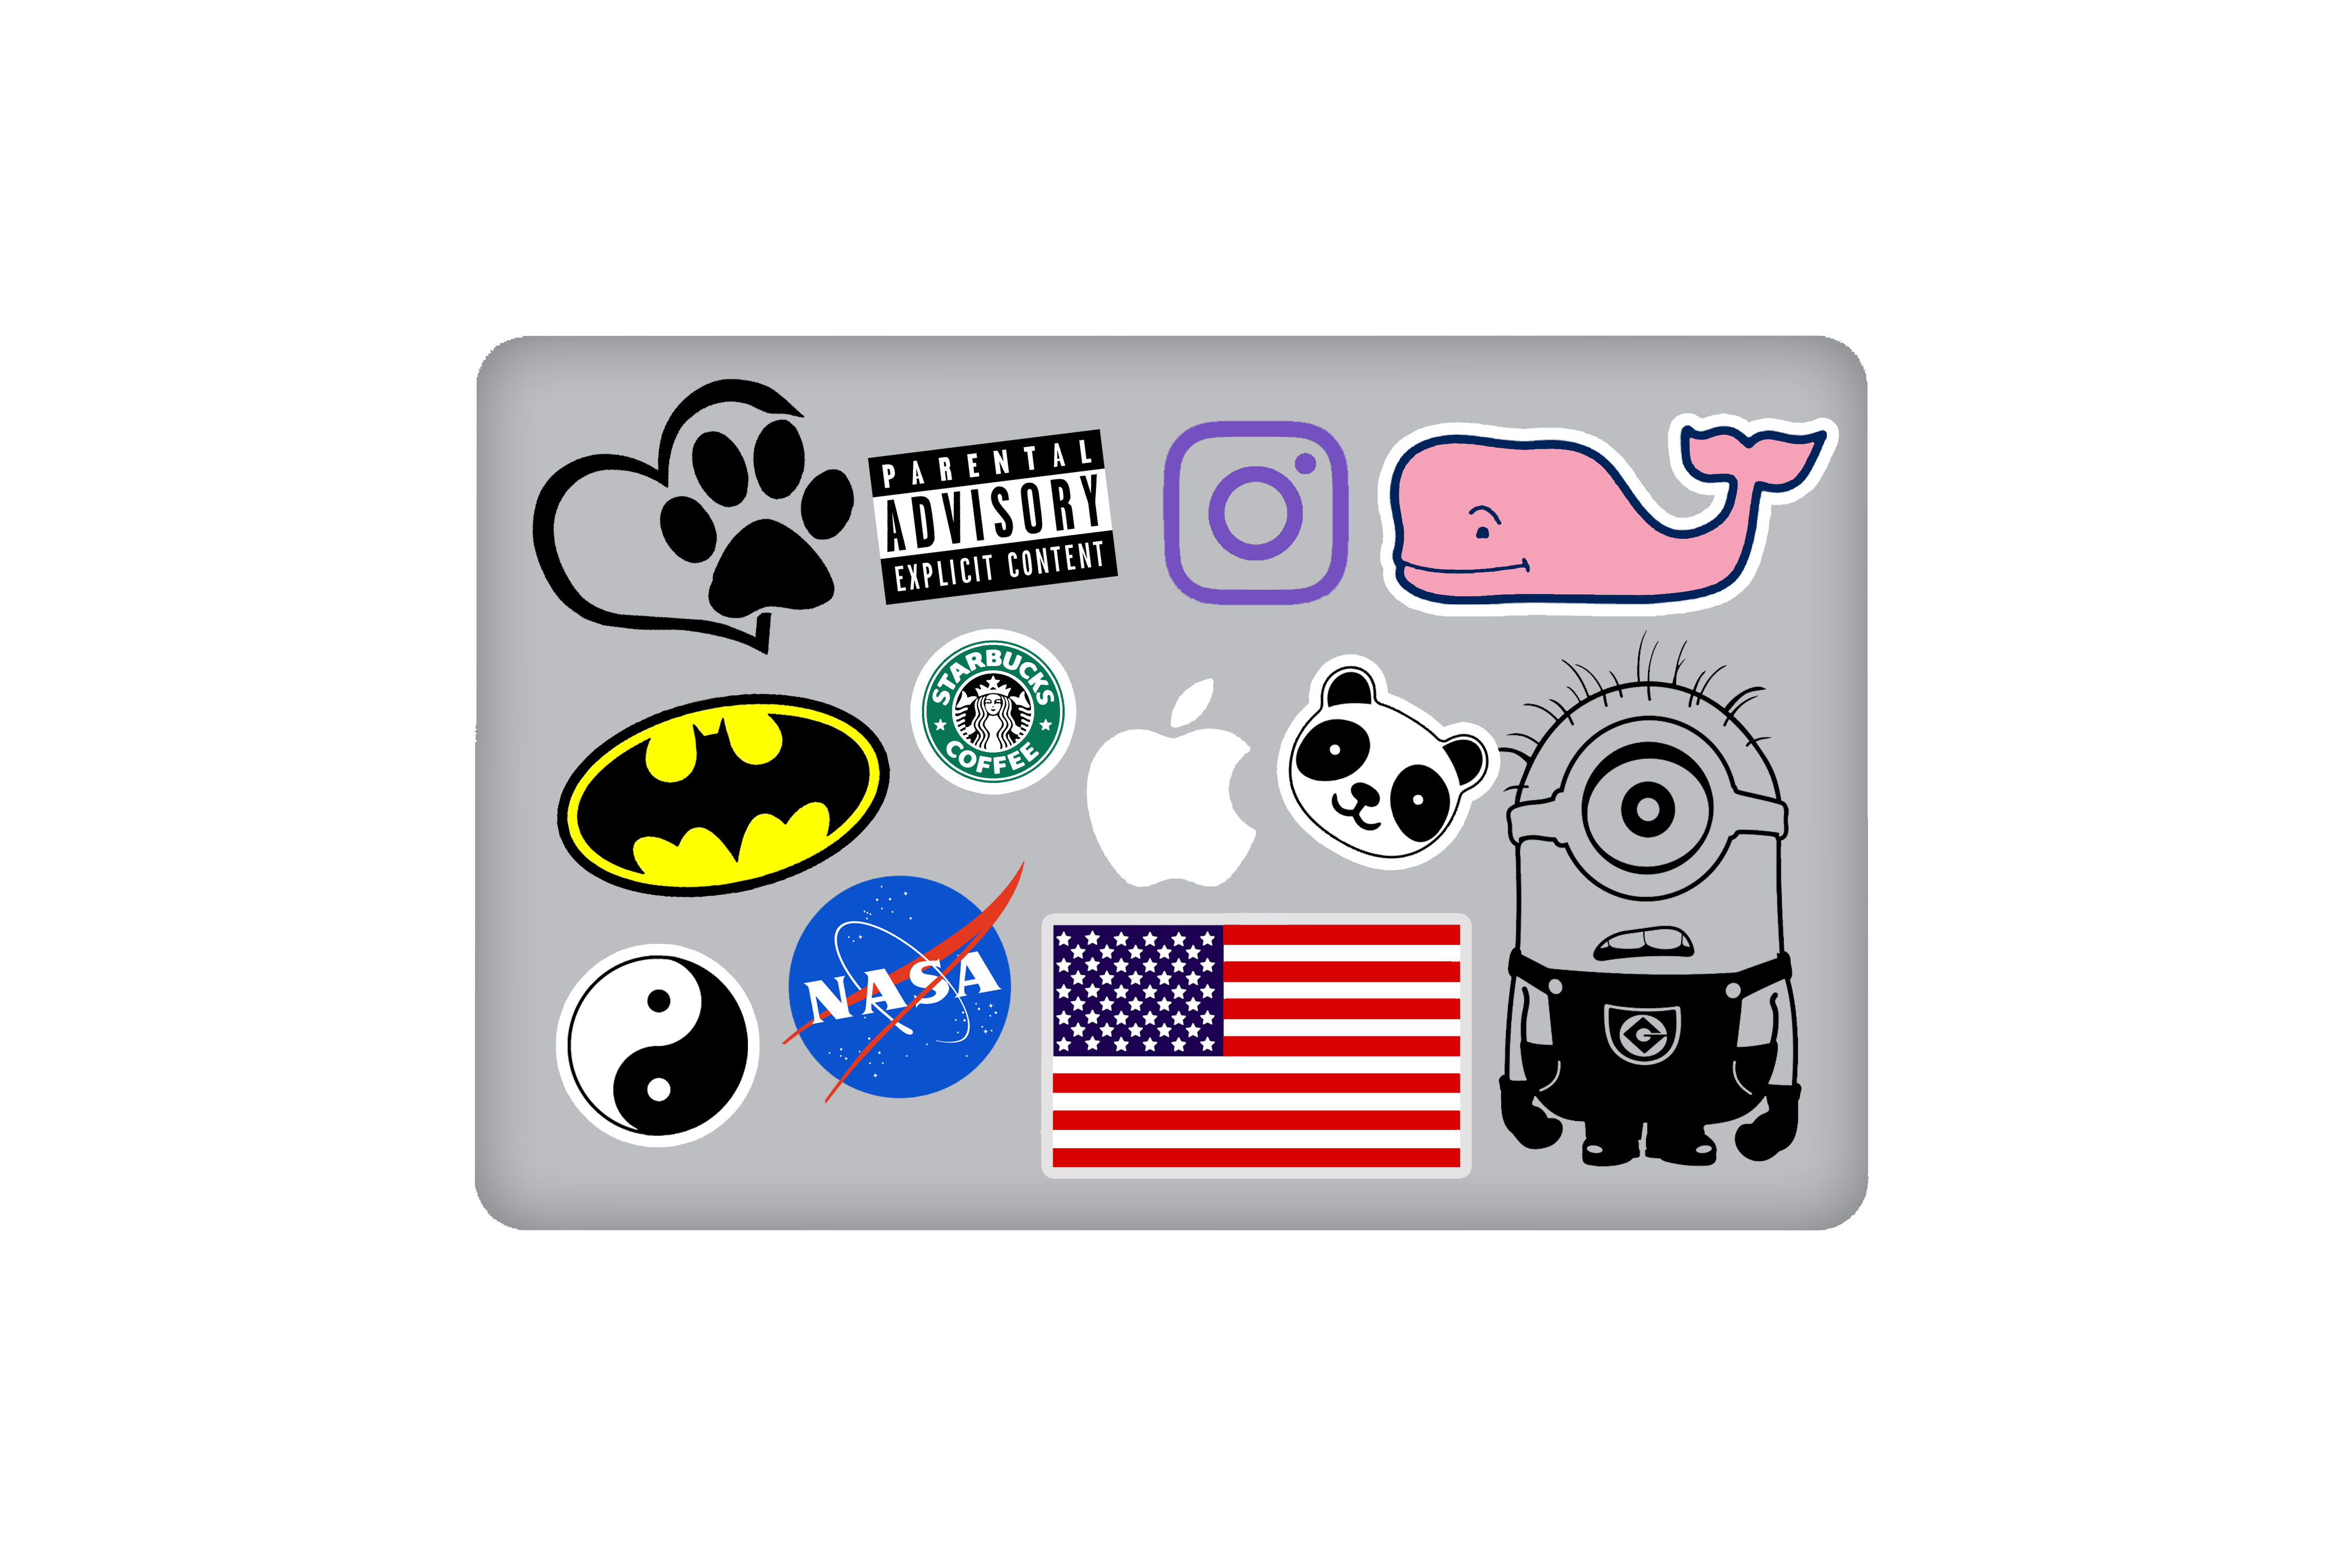 pages of laptop stickers on redbubble.com, combing the Internet for quirky stickers...